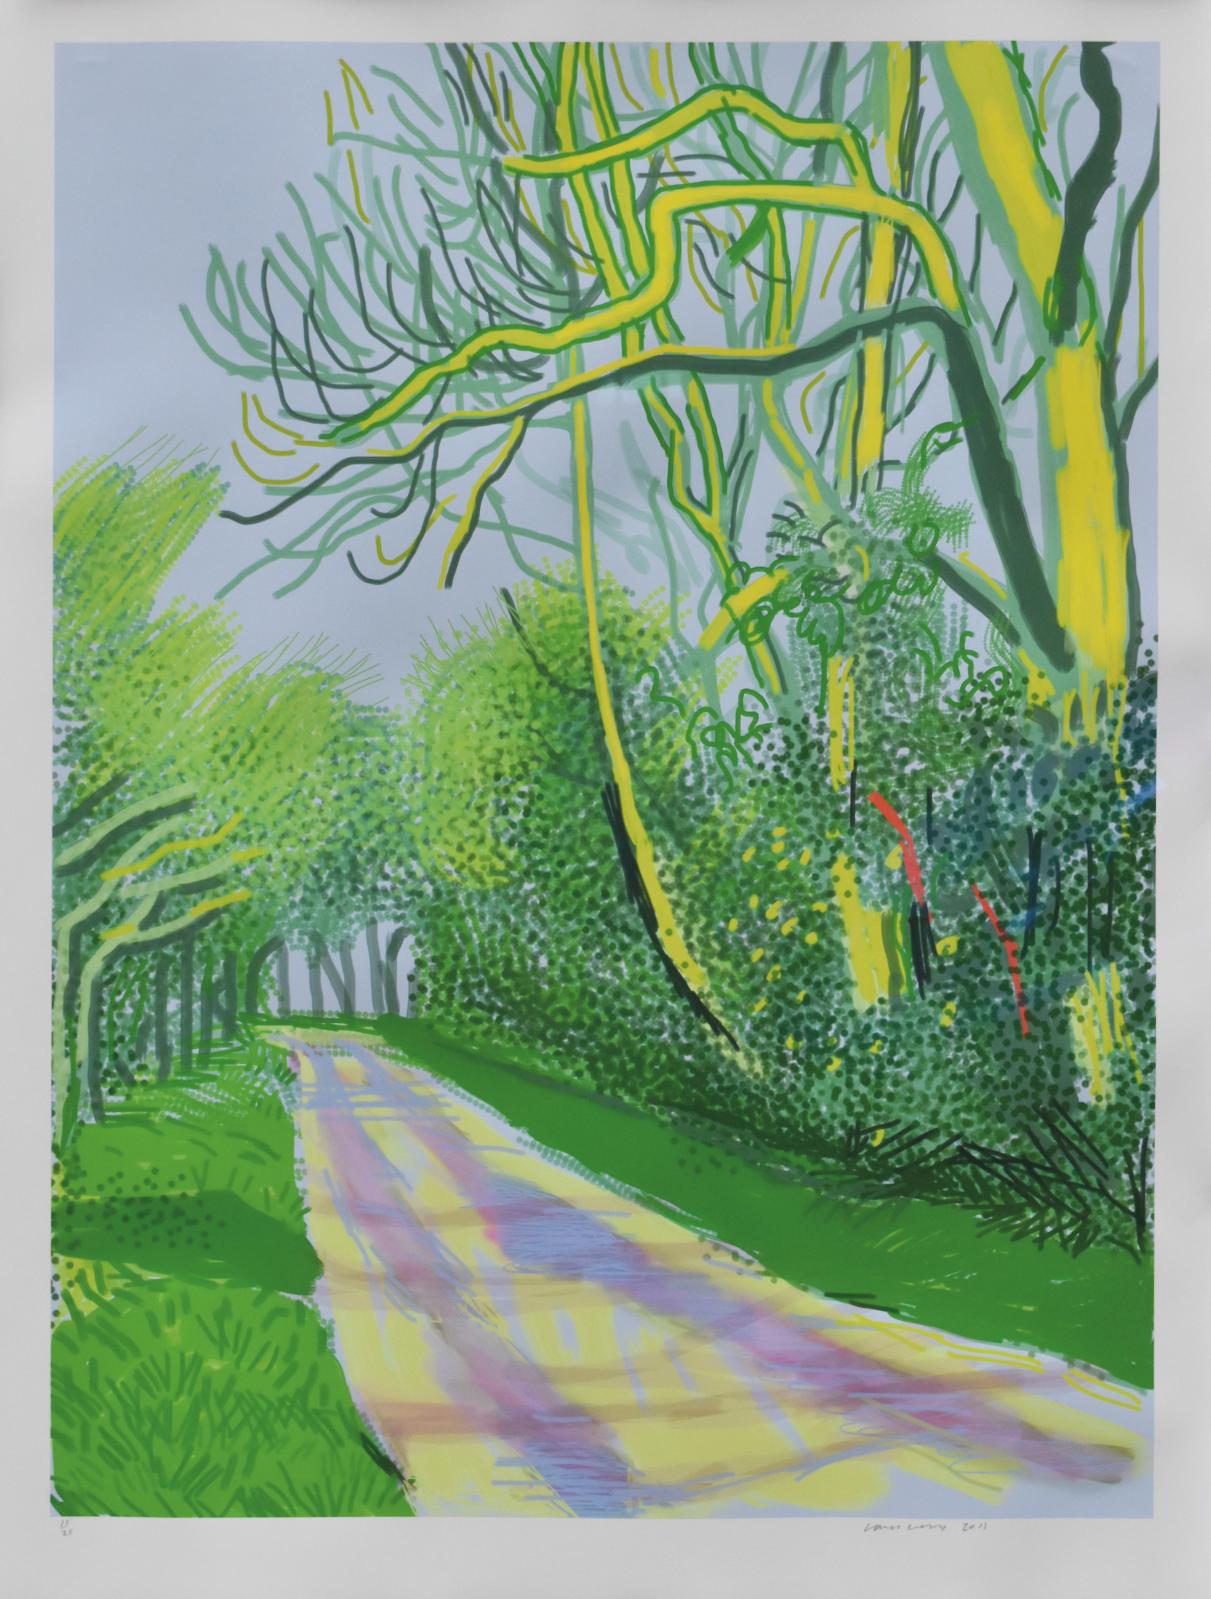 David Hockney (b. 1937), The Arrival of Spring in Woldgate, East Yorkshire in 2011 (twenty eleven) – 12 April, no. 2, 2011, drawing on iPad, digital print on paper, signed and dated, justified 13/25, 140 x 105 cm/55.12 x 41.34 in. Result: €125,708